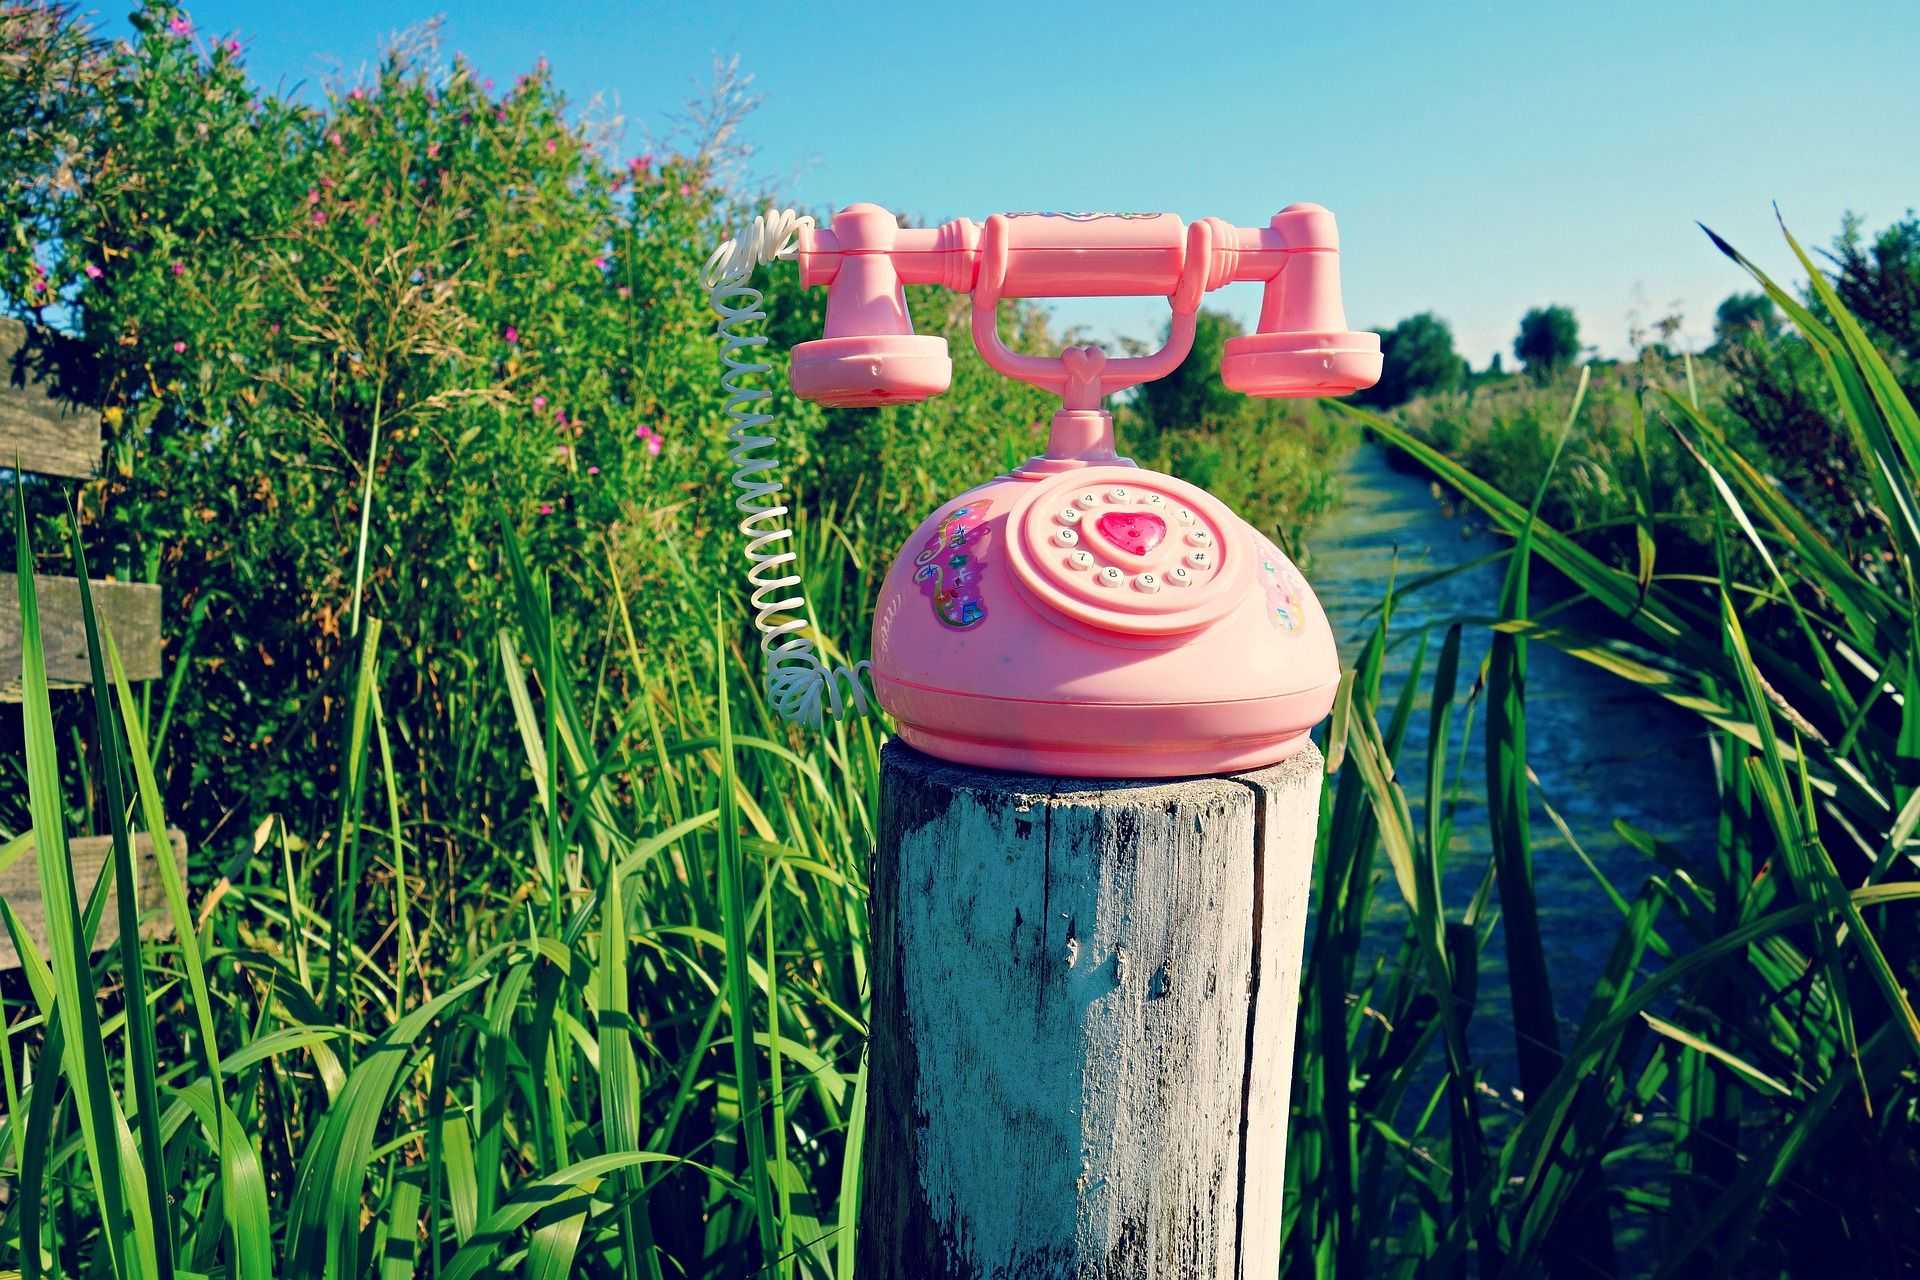 A pink phone on a wooden stake close. In the background there ist water and plants and a blue sky.